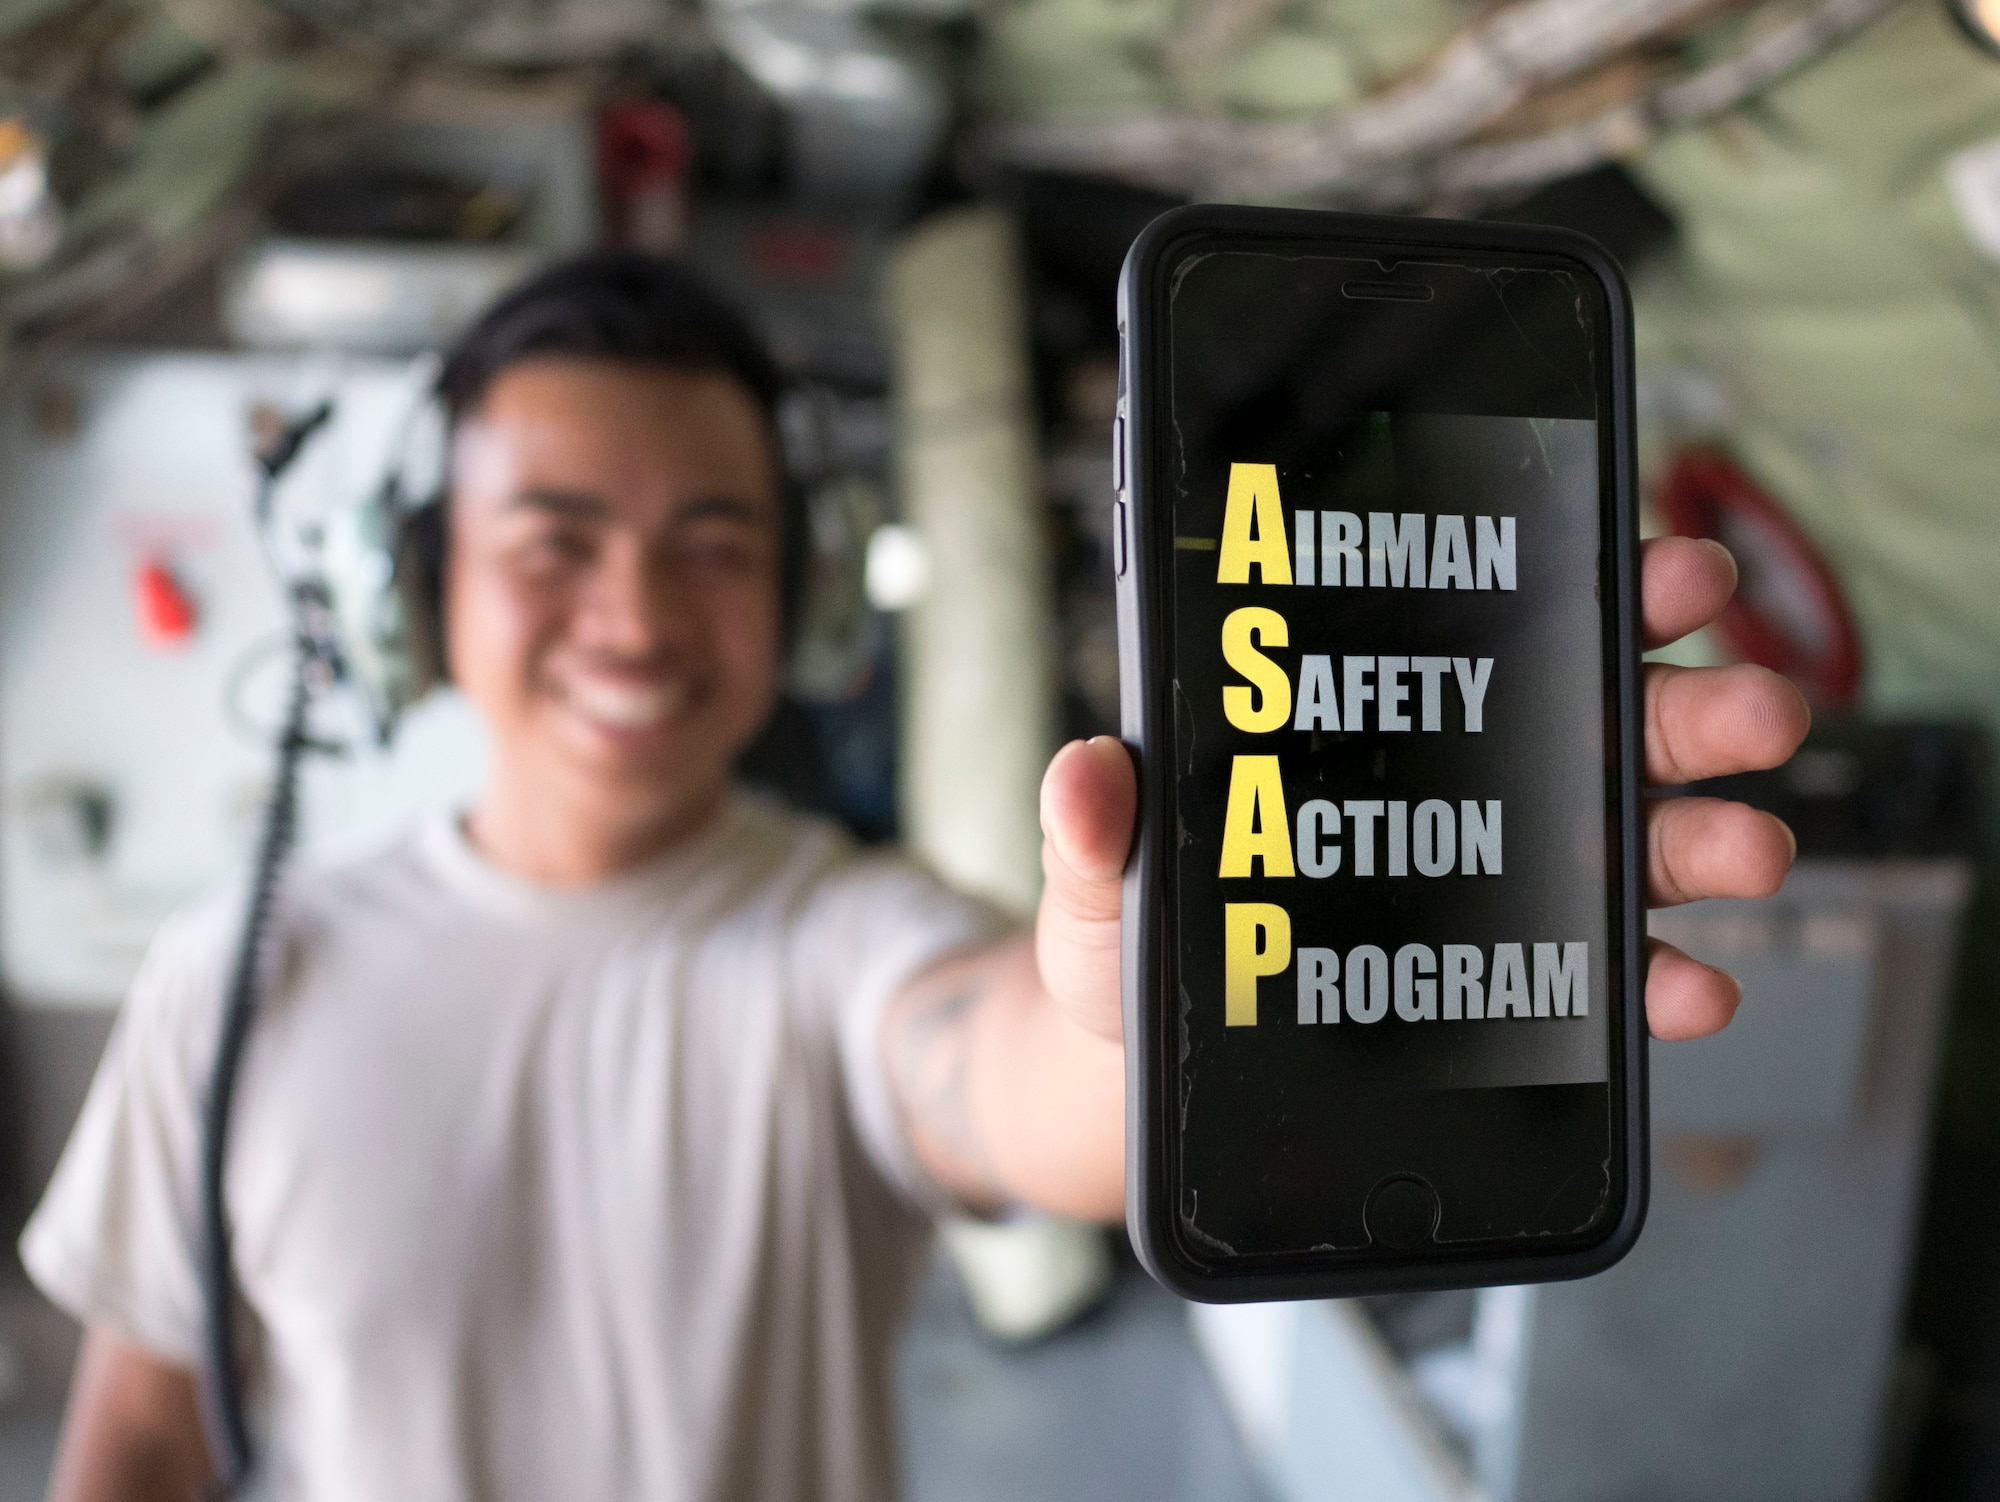 Link to information on the Airman Safety Action Program